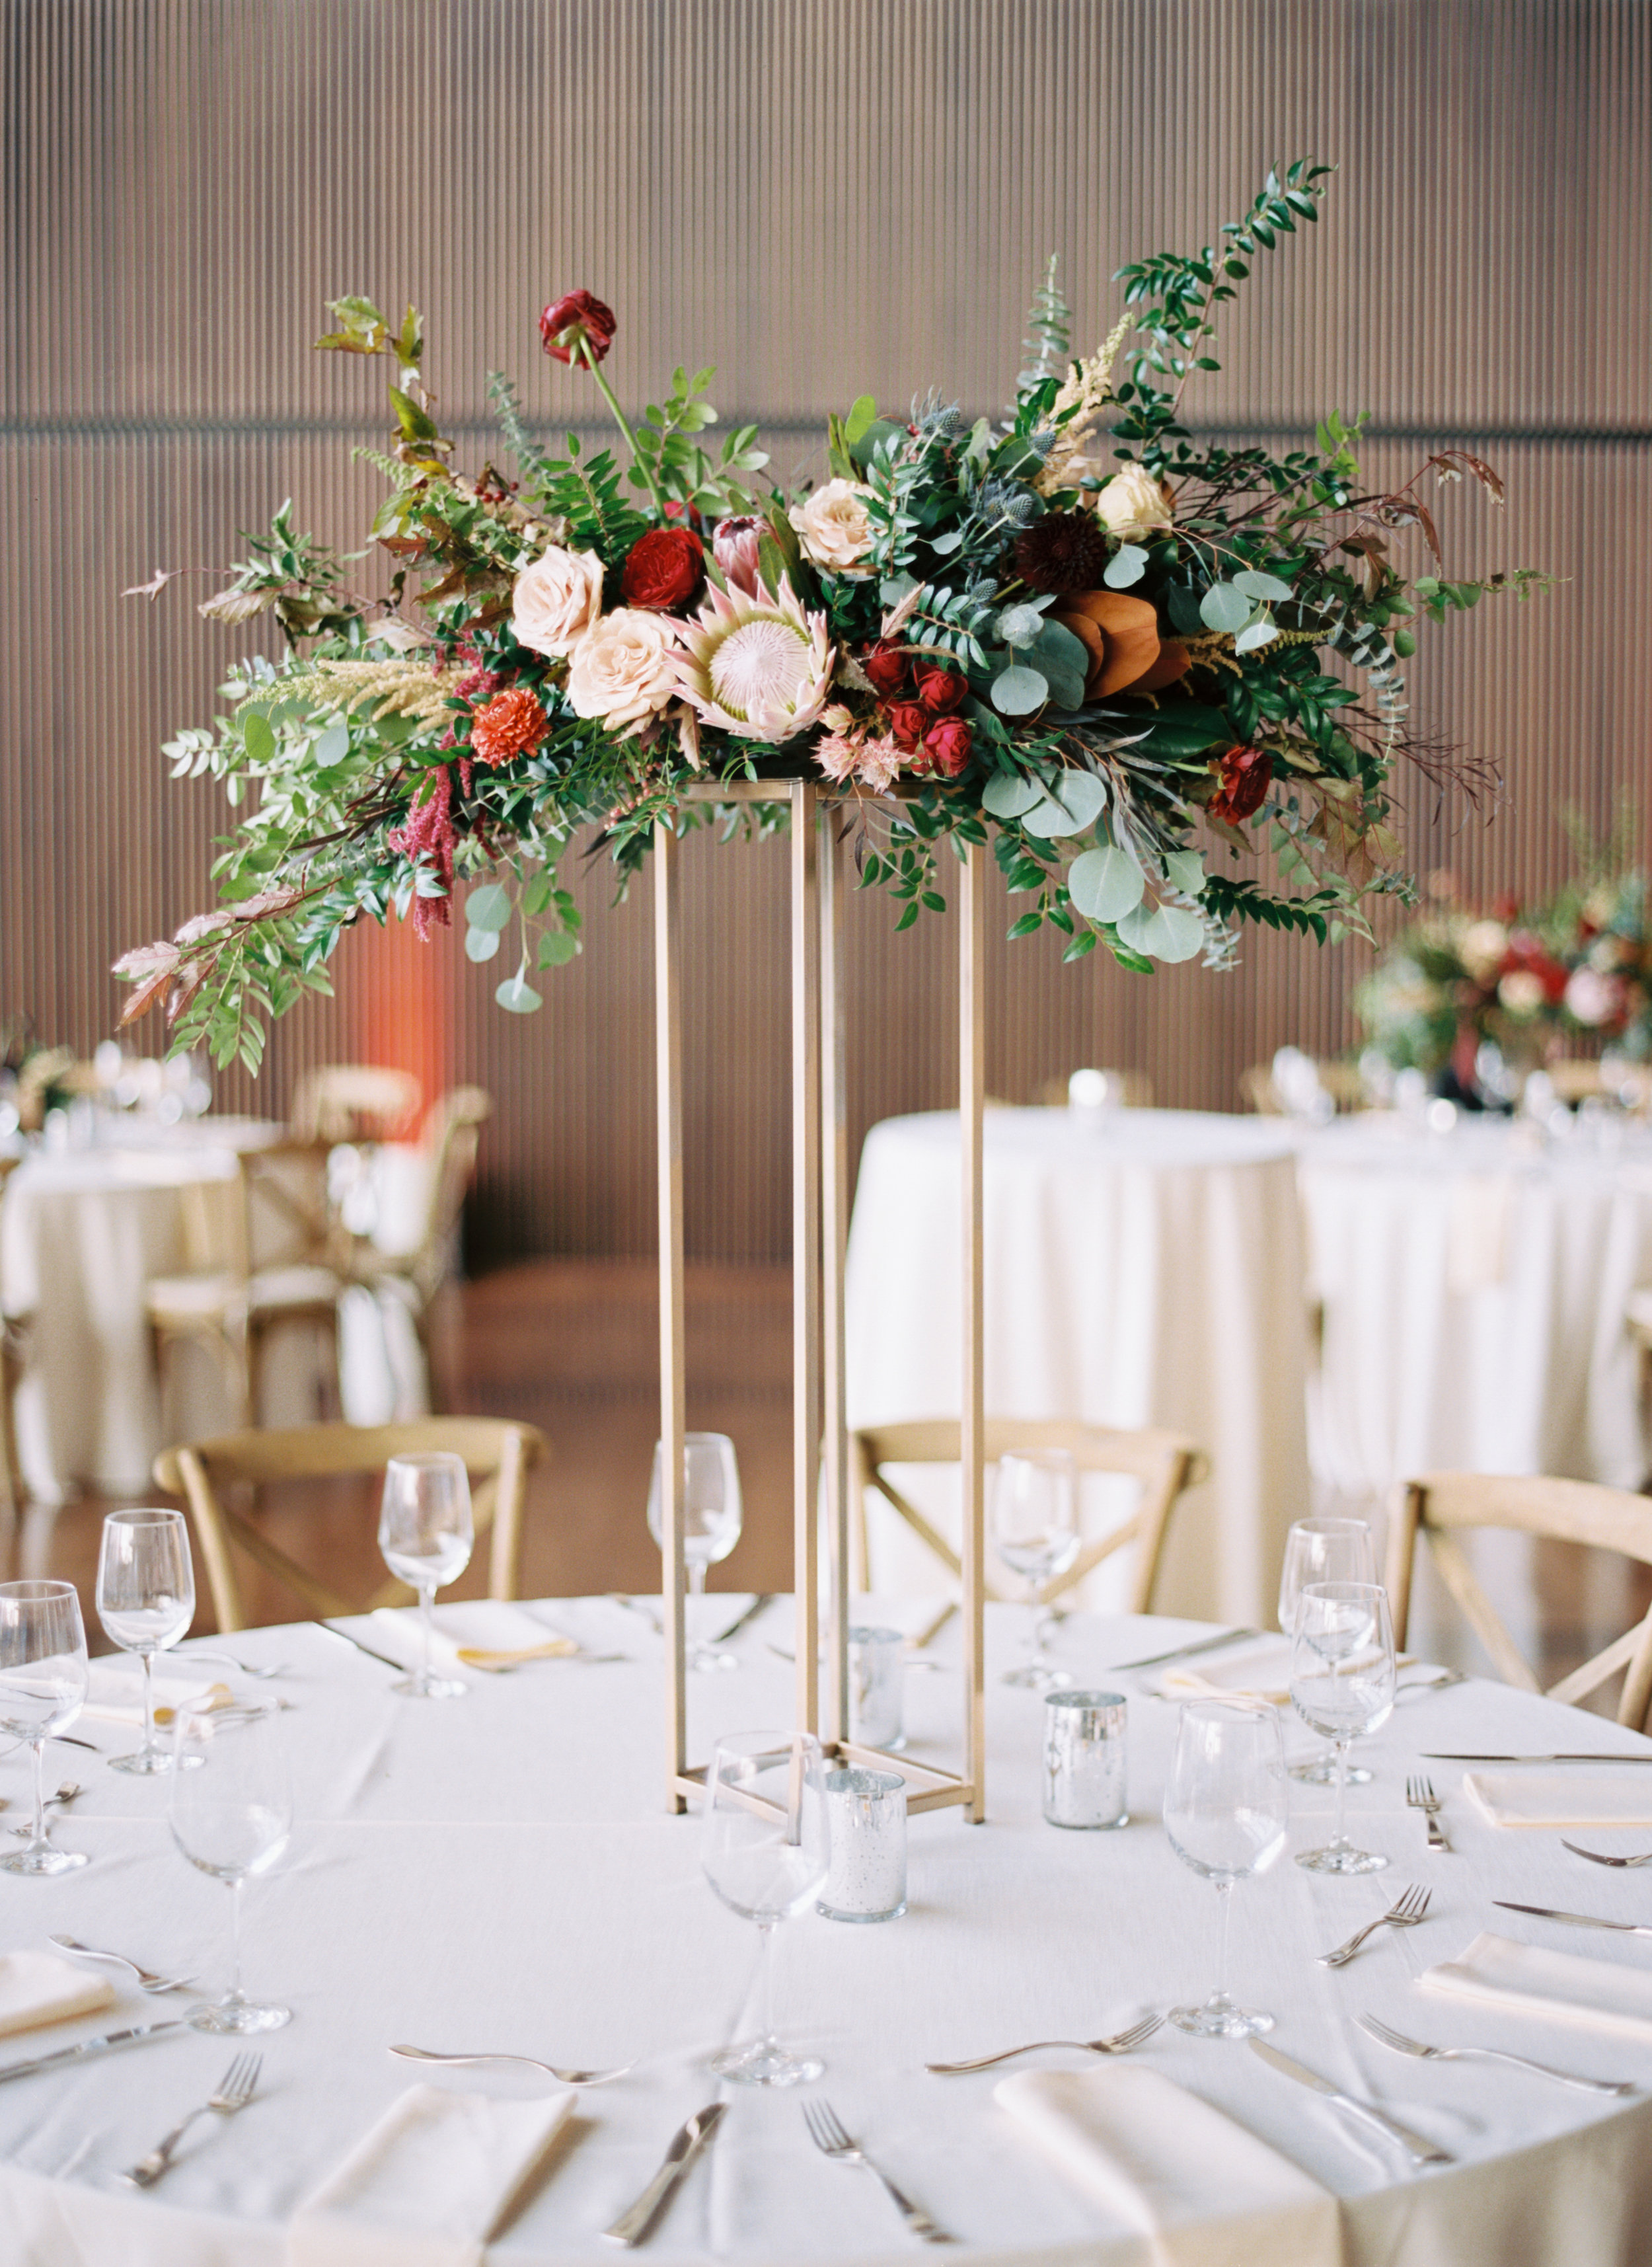 Blush and marsala centerpieces with protea, ranunculus, dahlias, and lush greenery // Country Music Hall of Fame Wedding, Nashville